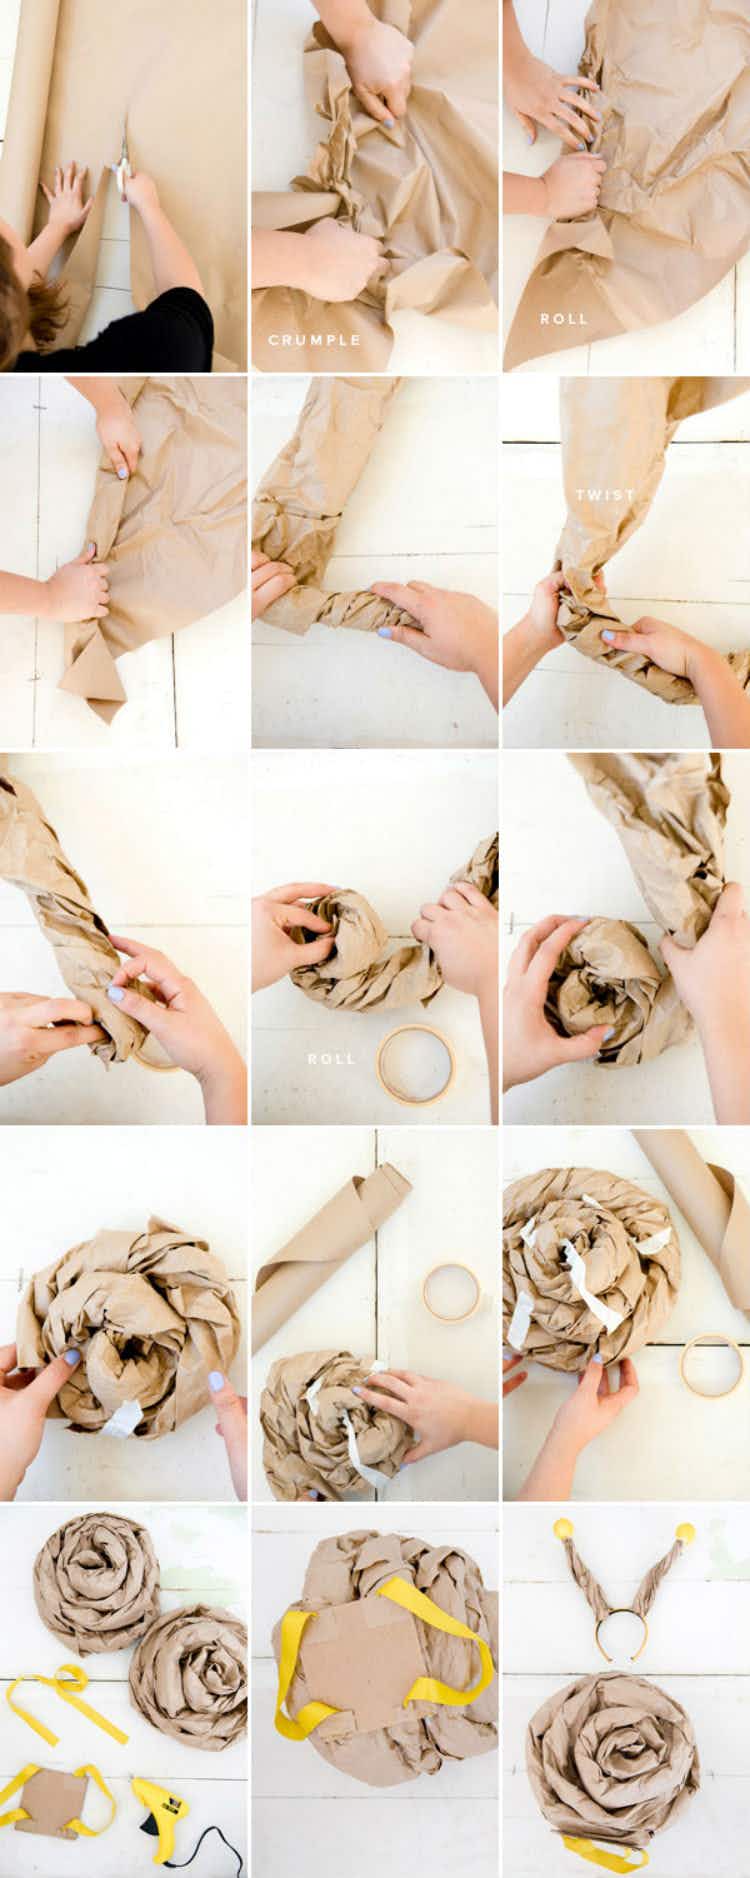  Roll up brown craft paper into a snail shell and put it on your child's back.